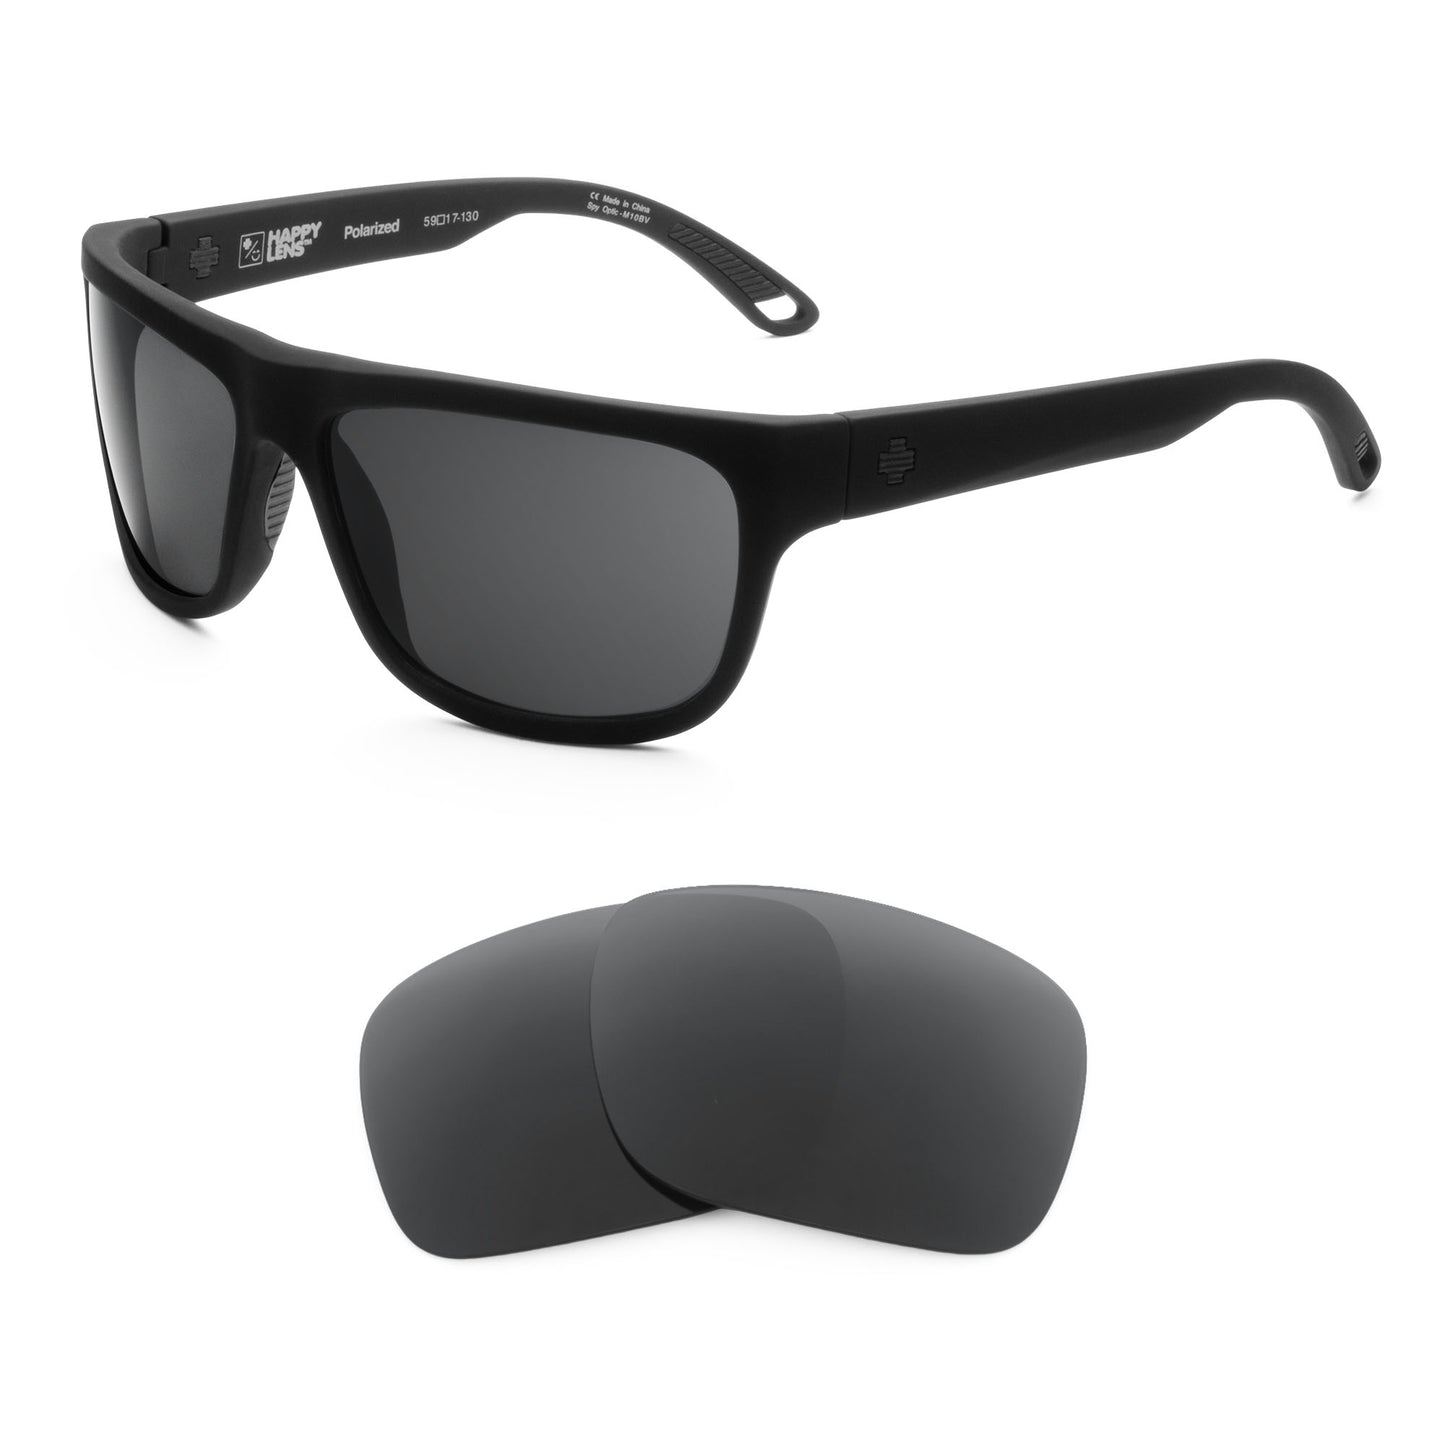 Spy Optic Angler sunglasses with replacement lenses